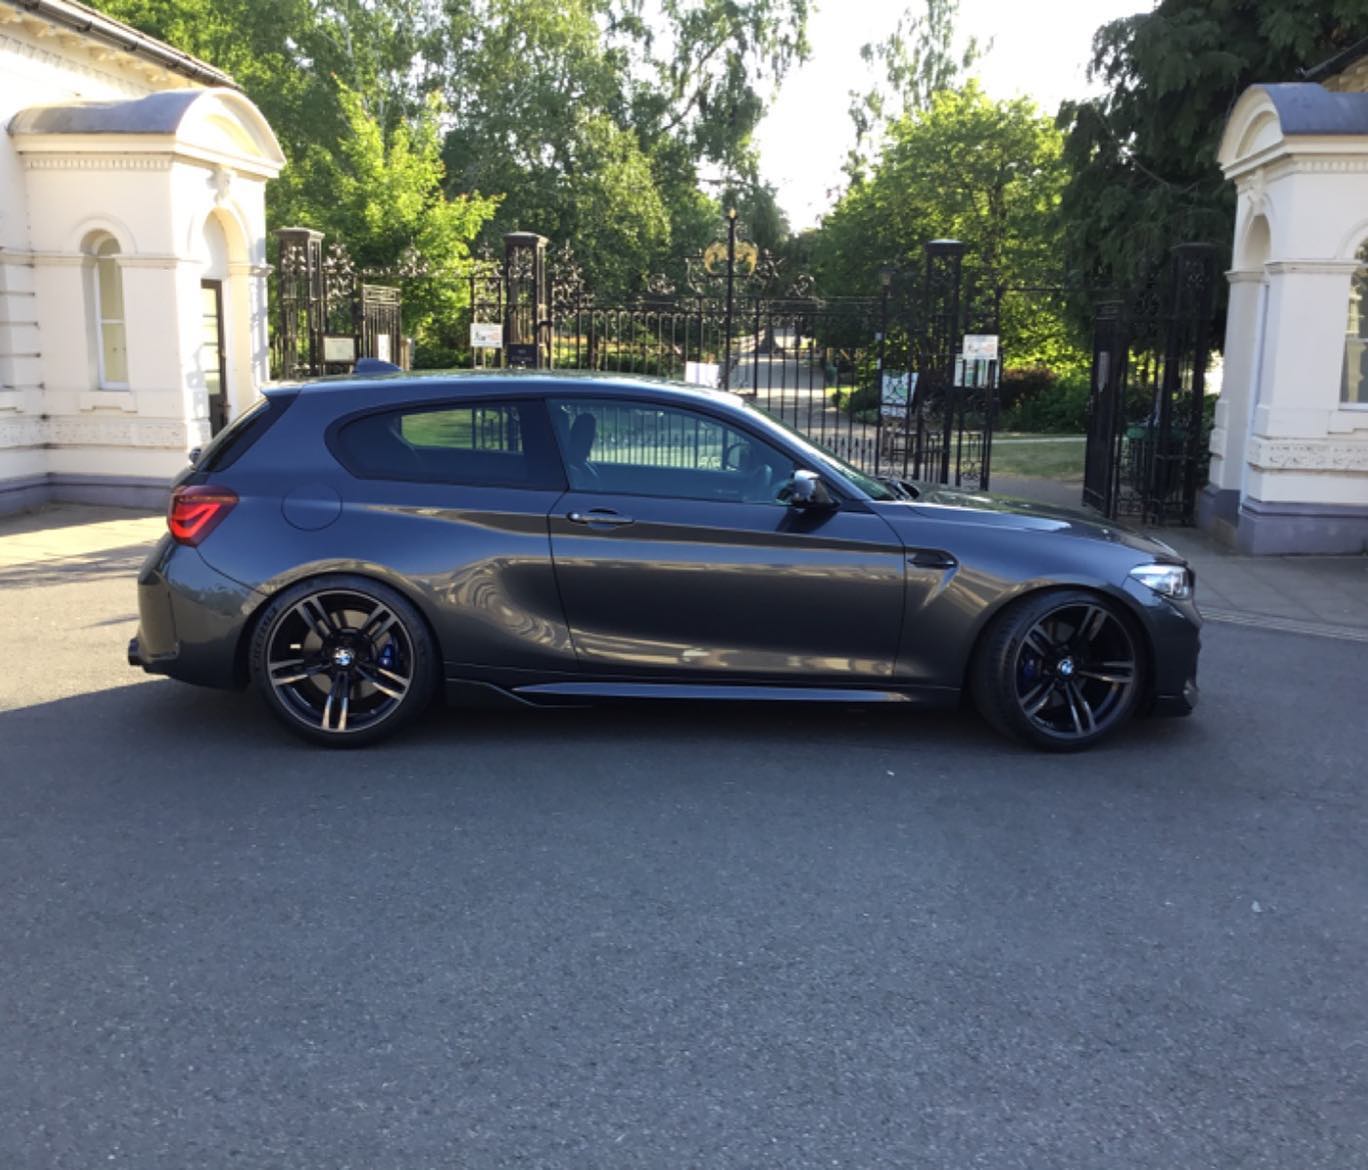 BMW M2 Shooting Brake Is a 1 Series With a Face Swap and